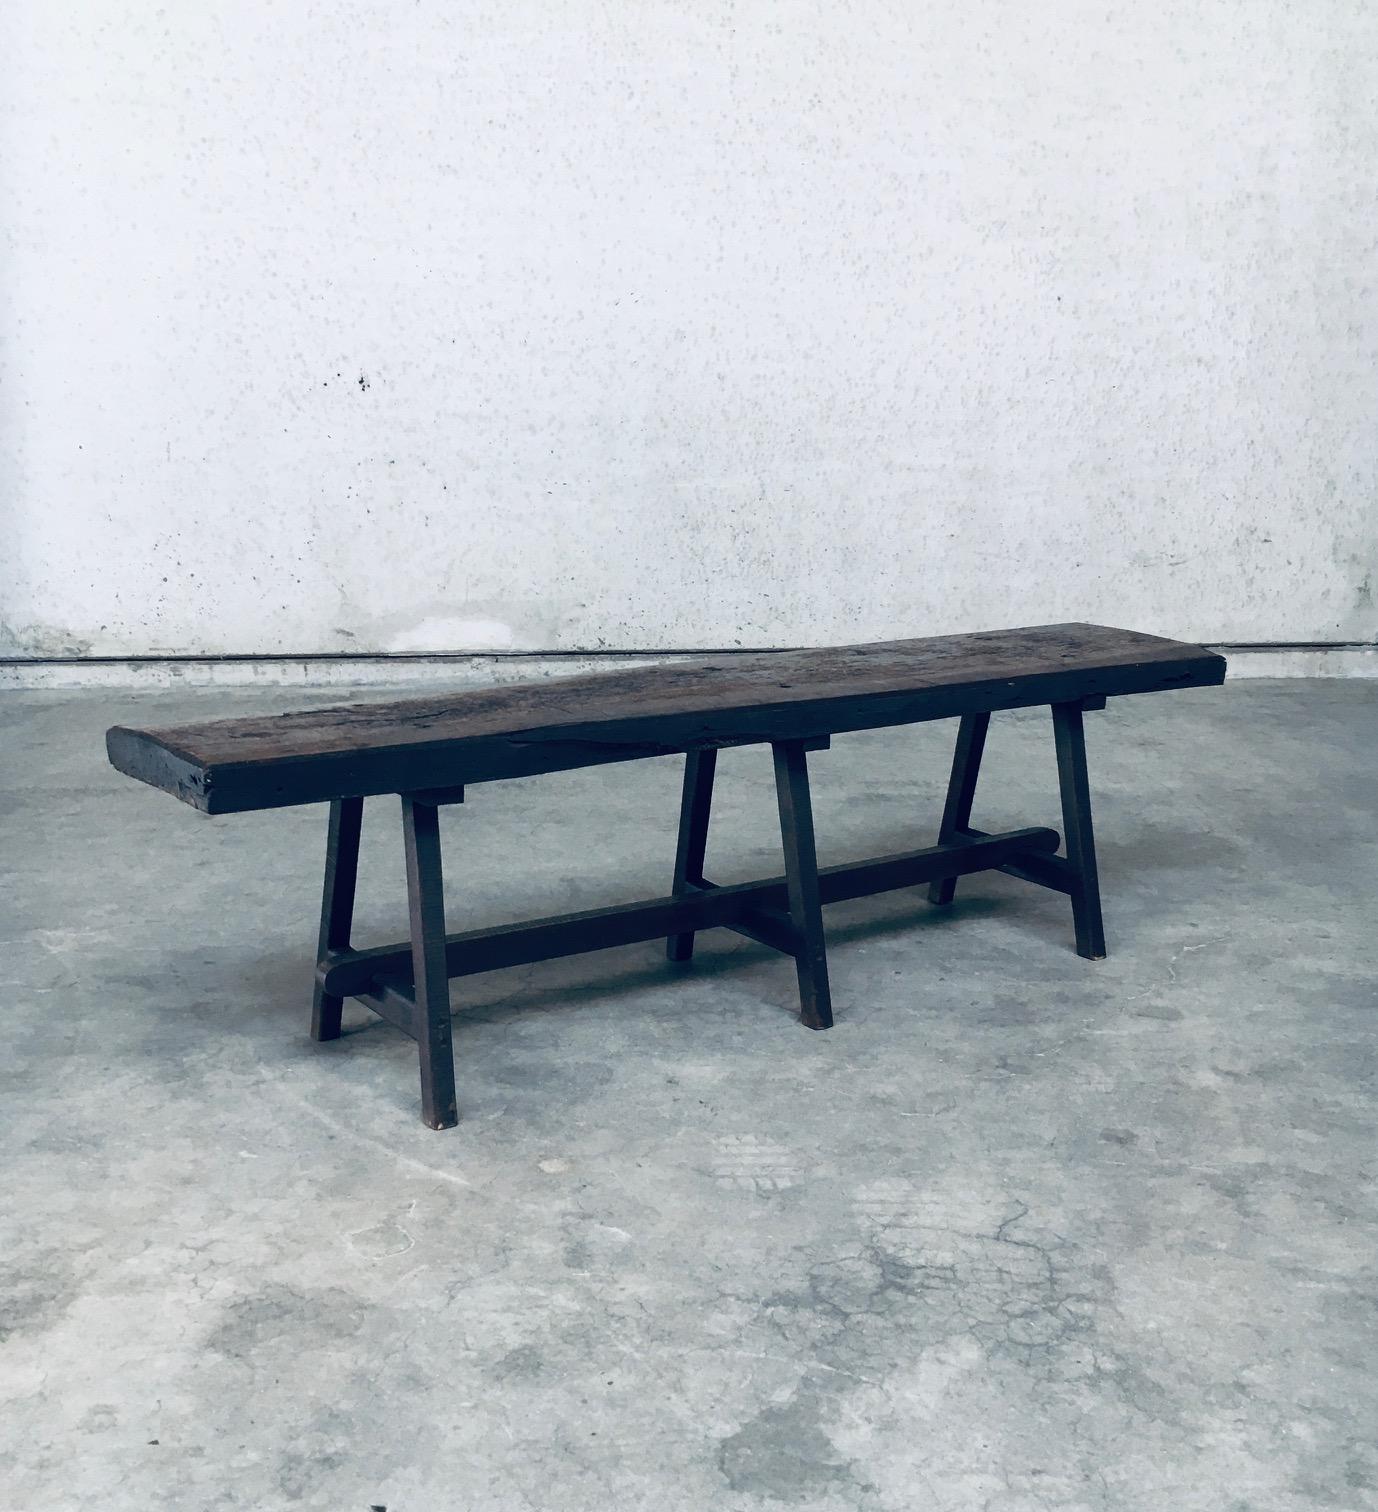 Vintage Early 1900's Handmade Wabi Sabi Style Rustic Design Bench. Made in Belgium, Late 1800's / early 1900's. Solid piece of oak as top and well constructed legs in oak wood. Oak slab top and legs are all dark stained. The bench comes from an old